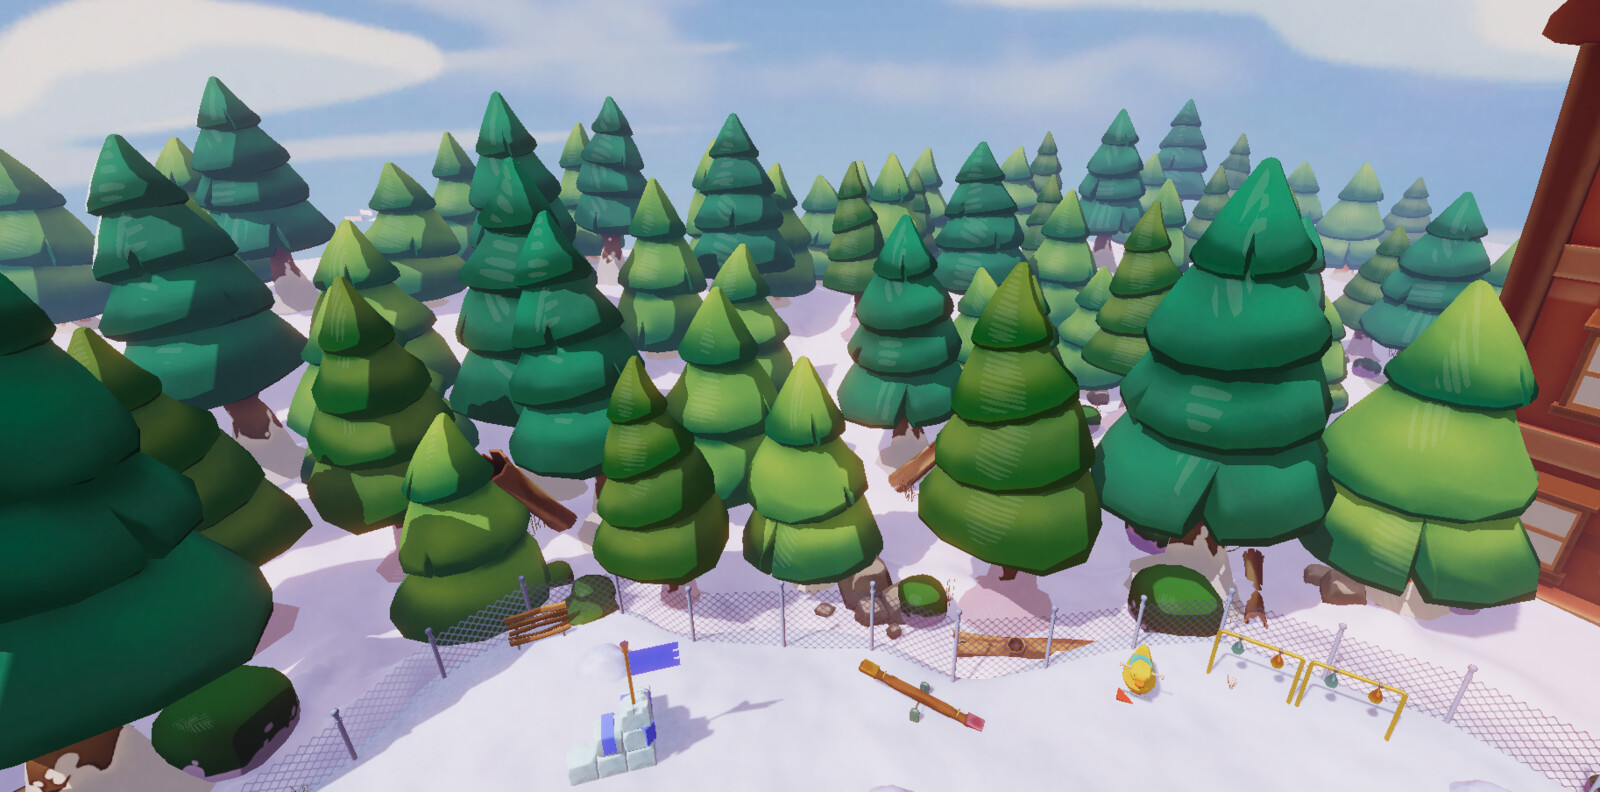 The fir trees in-game as foliage